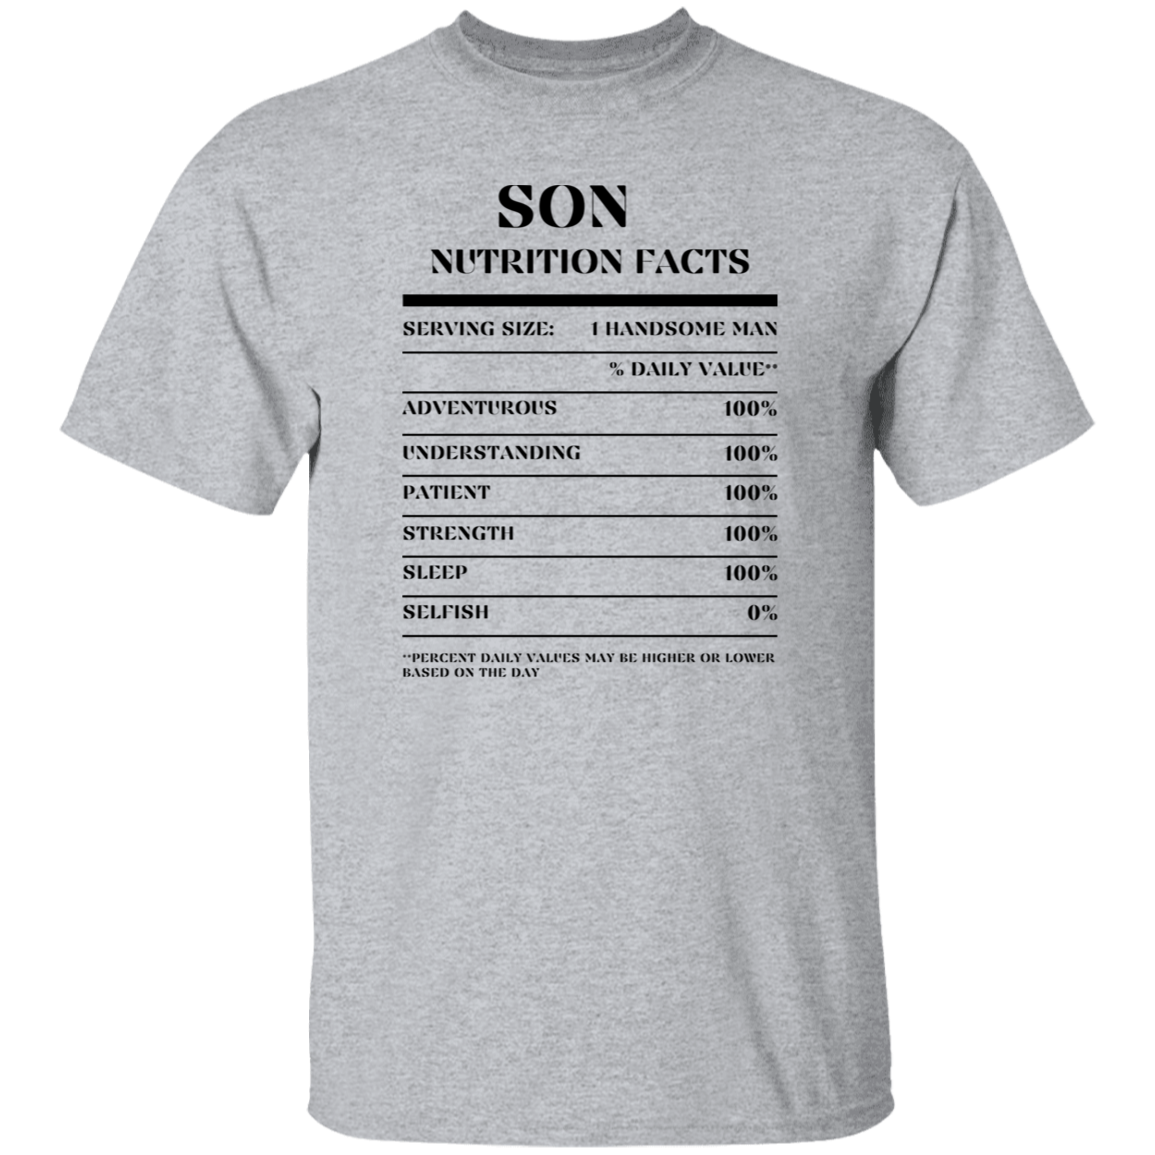 Nutrition Facts T-Shirt SS - Son - Black